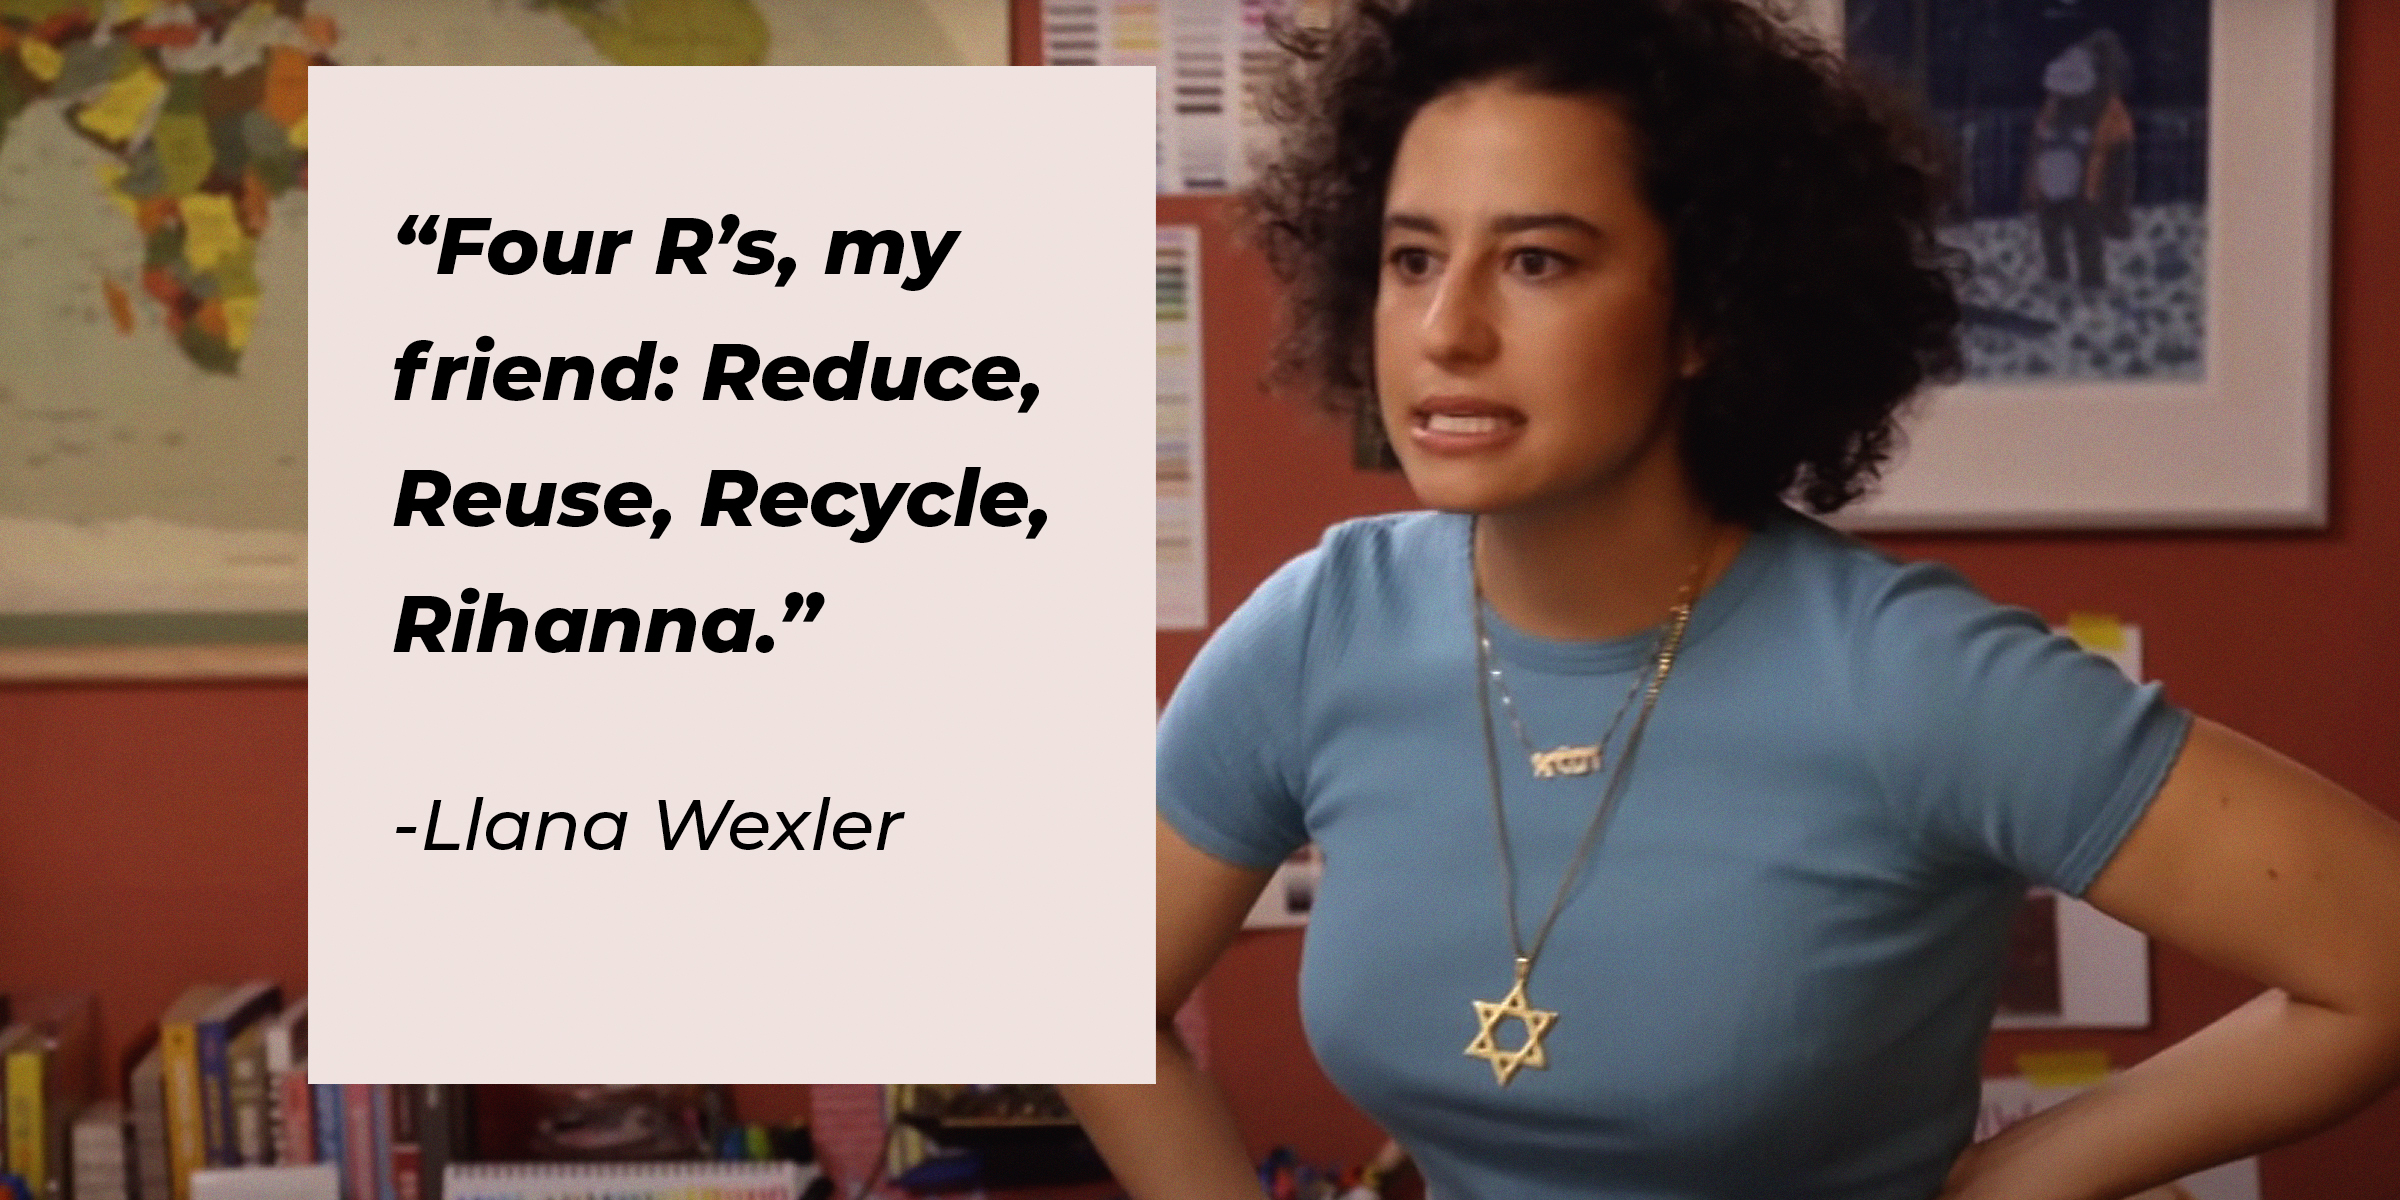 An image of Llana Wexler with her quote: “Four R’s, my friend: Reduce, Reuse, Recycle, Rihanna.” | Source: youtube.com/ComedyCentra